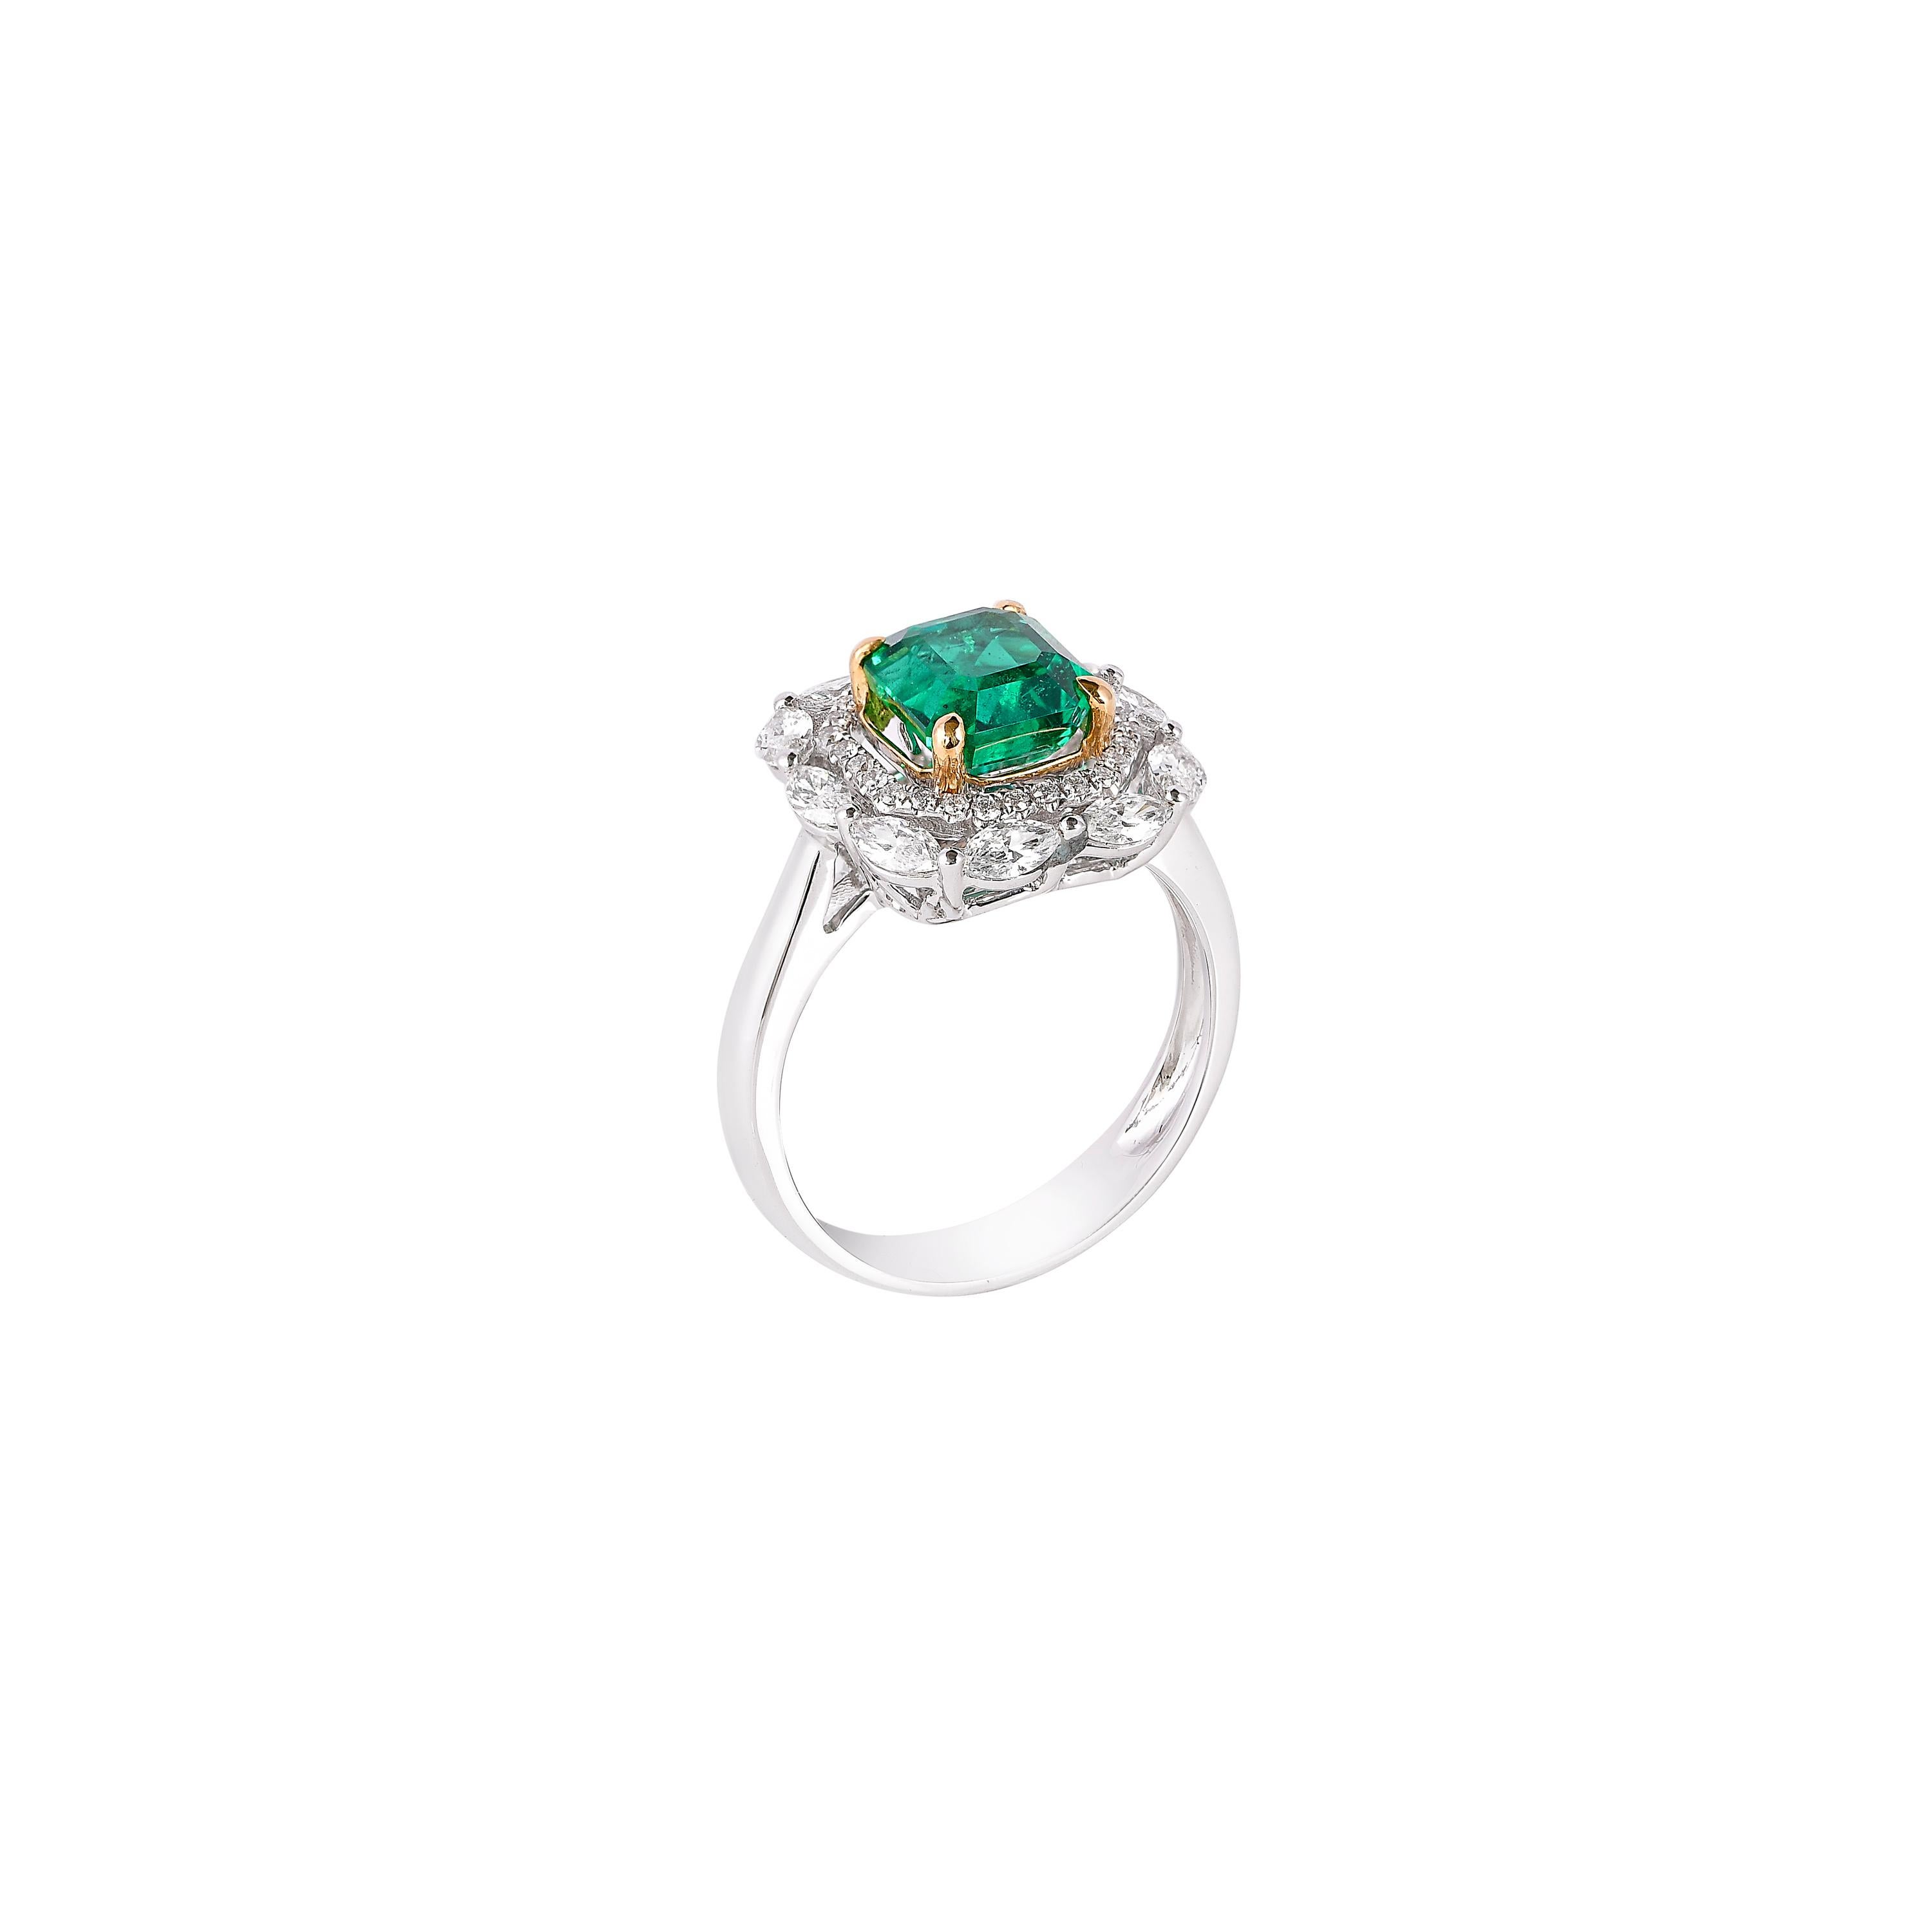 Art Deco GRS Certified 1.9 Carat Zambian Emerald and Diamond Ring in 18 Karat White Gold For Sale